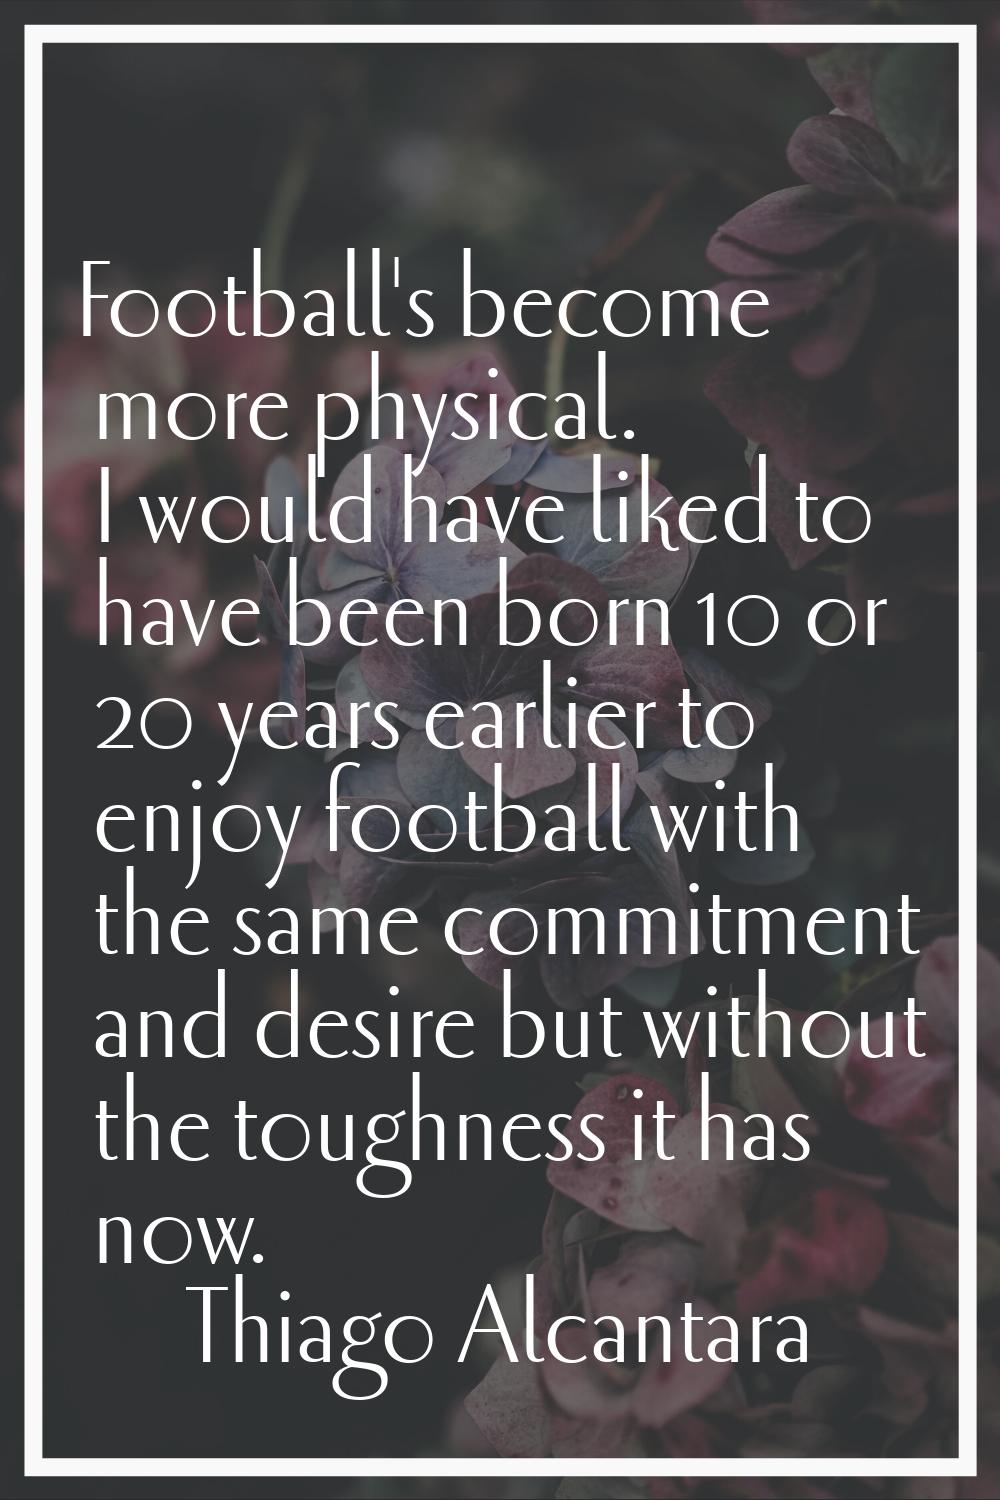 Football's become more physical. I would have liked to have been born 10 or 20 years earlier to enj